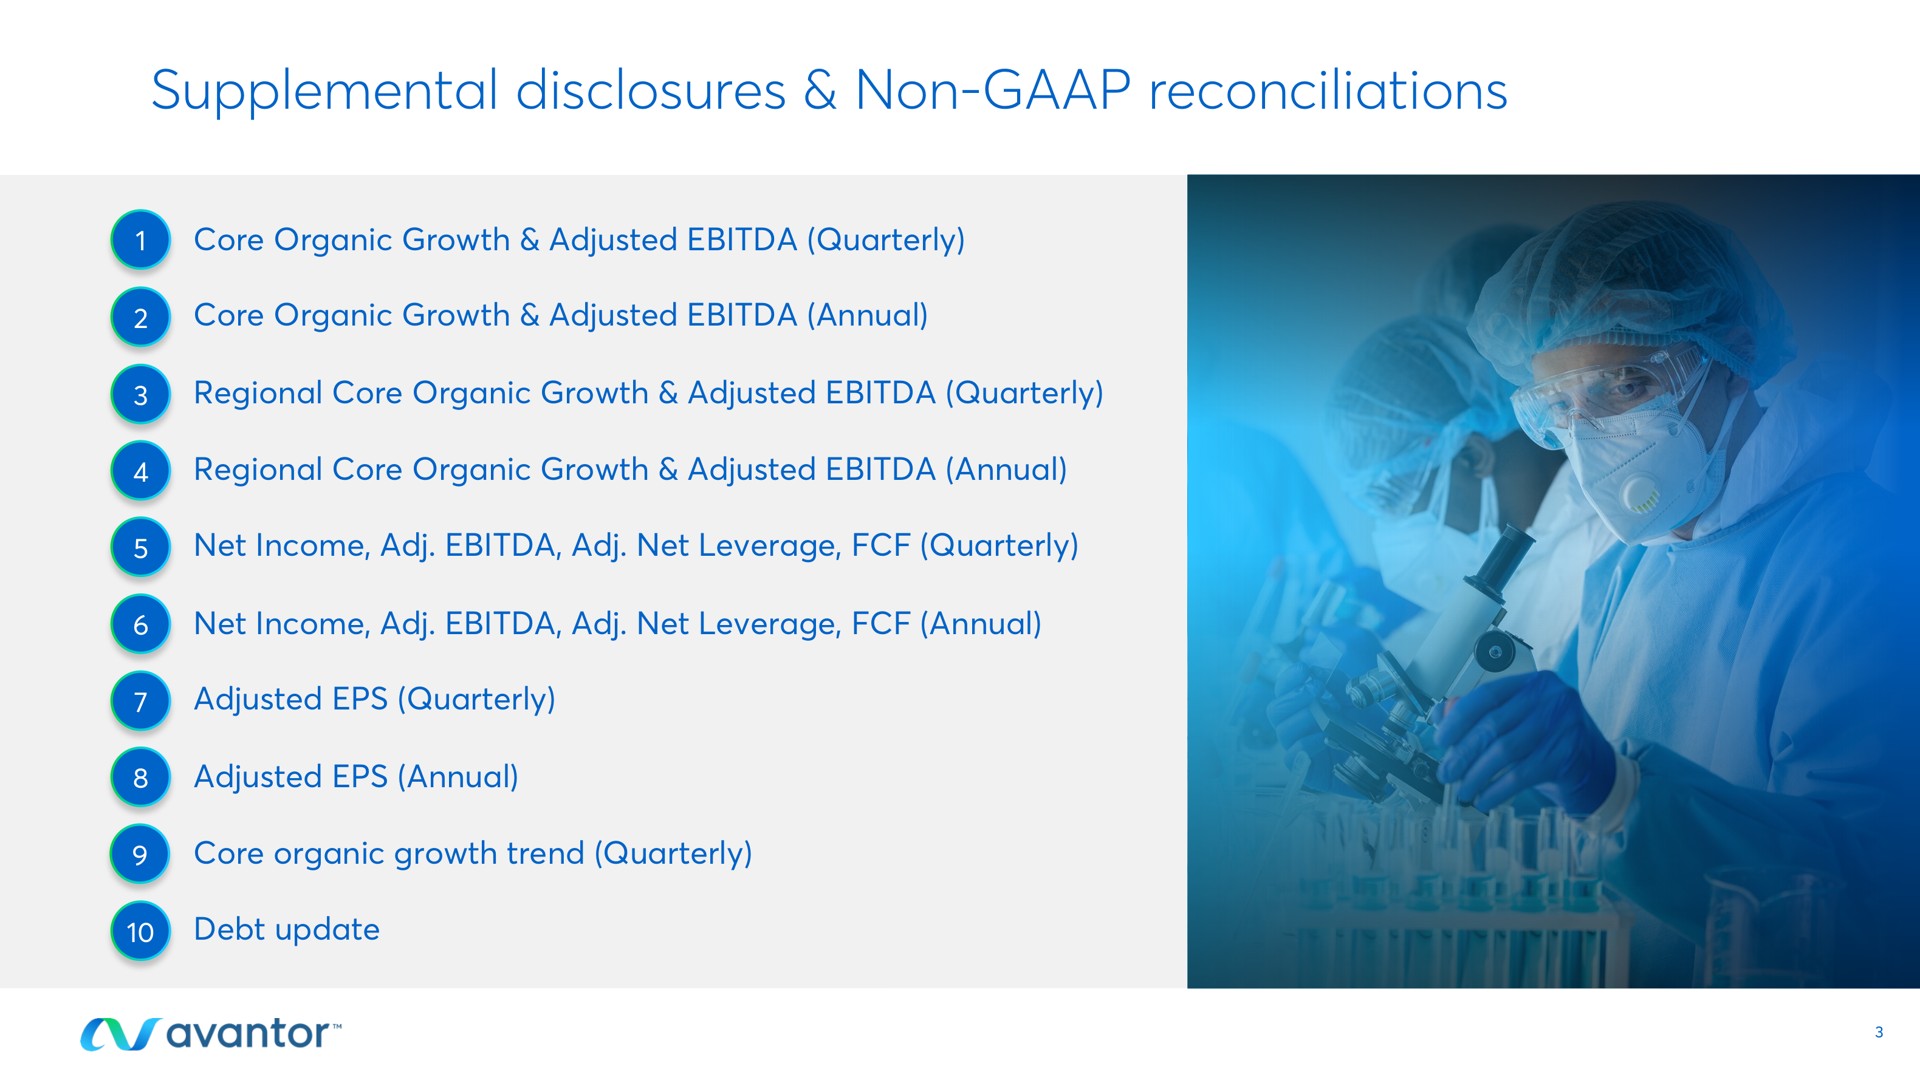 supplemental disclosures non reconciliations core organic growth adjusted quarterly core organic growth adjusted annual regional core organic growth adjusted quarterly regional core organic growth adjusted annual net income net leverage quarterly net income net leverage annual adjusted quarterly adjusted annual core organic growth trend quarterly debt update | Avantor